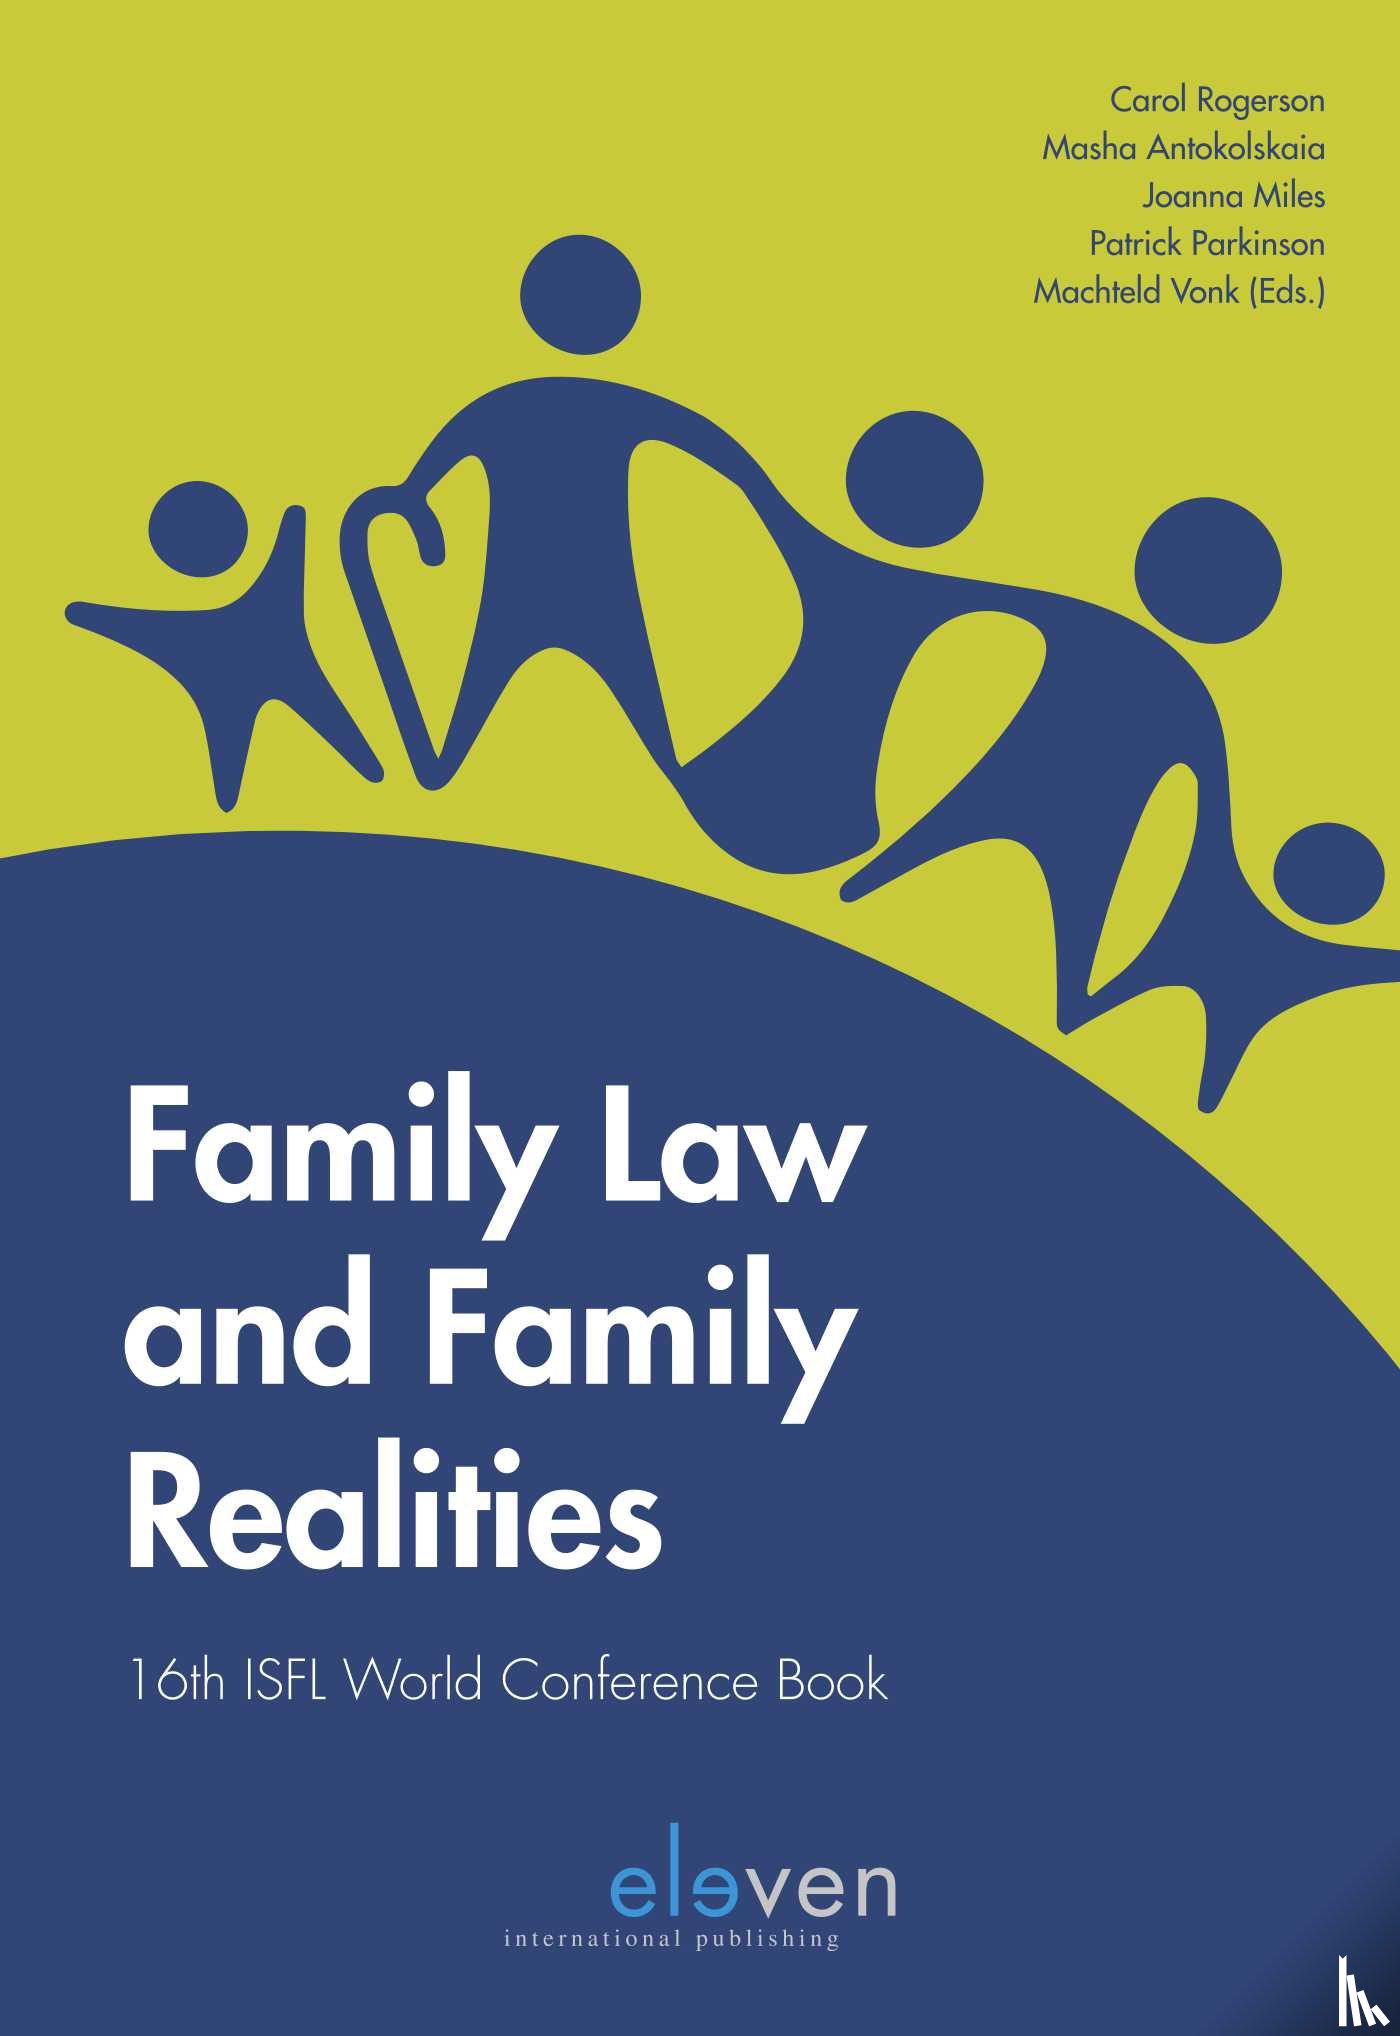  - Family Law and Family Realities